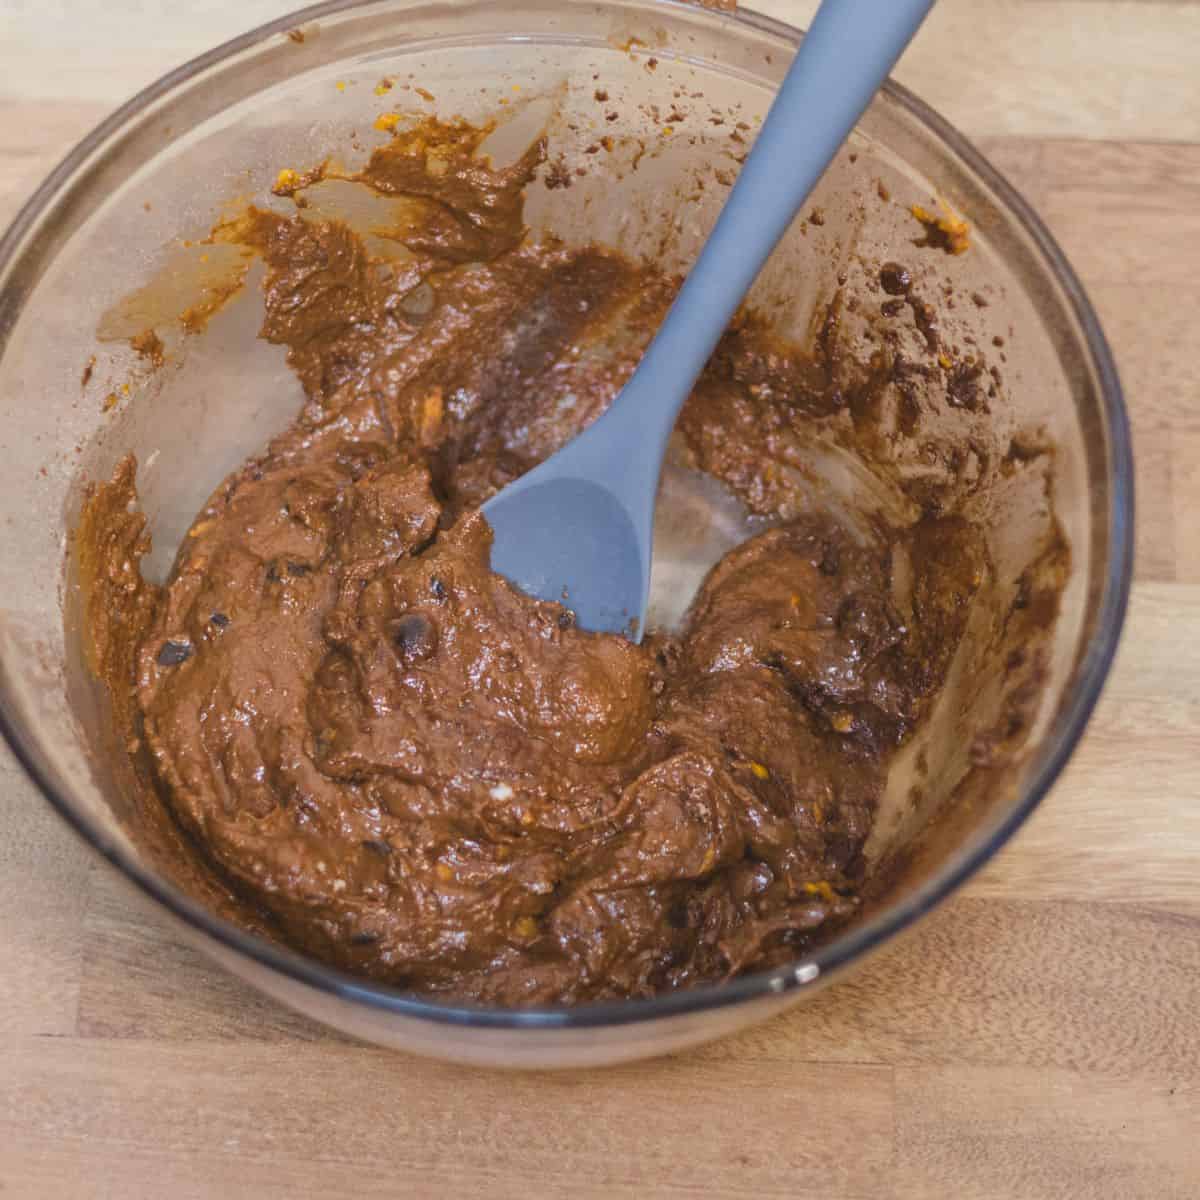 A bowl of thick, chocolate brownie batter with a silicone spatula, indicating the step where dark chocolate chips are folded into the mixture.